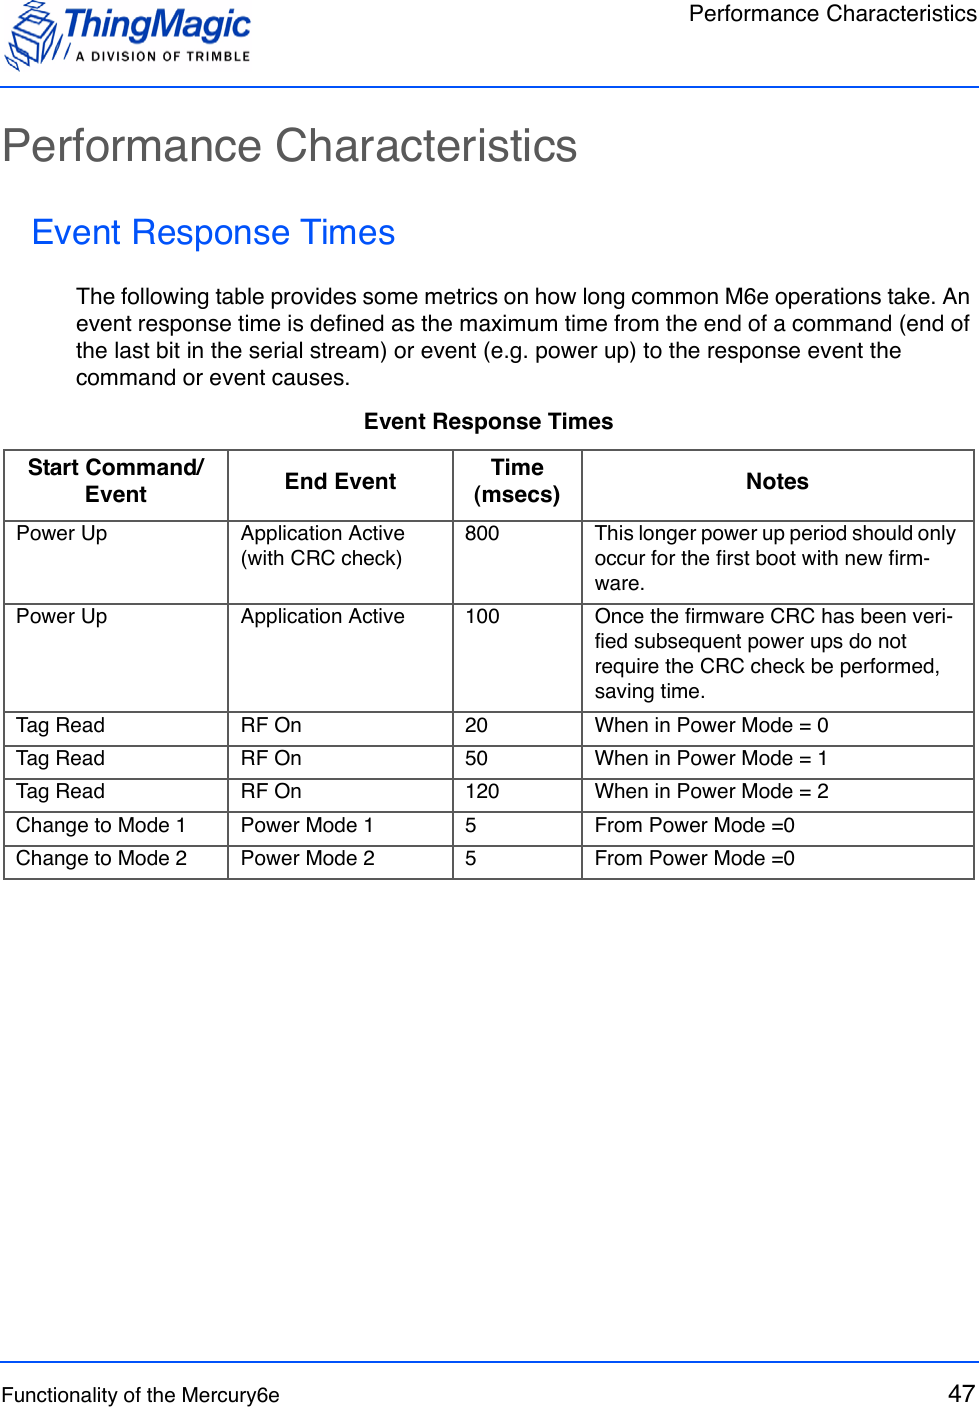 Performance CharacteristicsFunctionality of the Mercury6e 47Performance CharacteristicsEvent Response TimesThe following table provides some metrics on how long common M6e operations take. An event response time is defined as the maximum time from the end of a command (end of the last bit in the serial stream) or event (e.g. power up) to the response event the command or event causes. Event Response TimesStart Command/Event End Event Time (msecs) NotesPower Up Application Active (with CRC check)800  This longer power up period should only occur for the first boot with new firm-ware.Power Up Application Active 100 Once the firmware CRC has been veri-fied subsequent power ups do not require the CRC check be performed, saving time.Tag Read RF On 20 When in Power Mode = 0Tag Read RF On 50 When in Power Mode = 1Tag Read RF On 120 When in Power Mode = 2Change to Mode 1 Power Mode 1 5 From Power Mode =0Change to Mode 2 Power Mode 2 5 From Power Mode =0